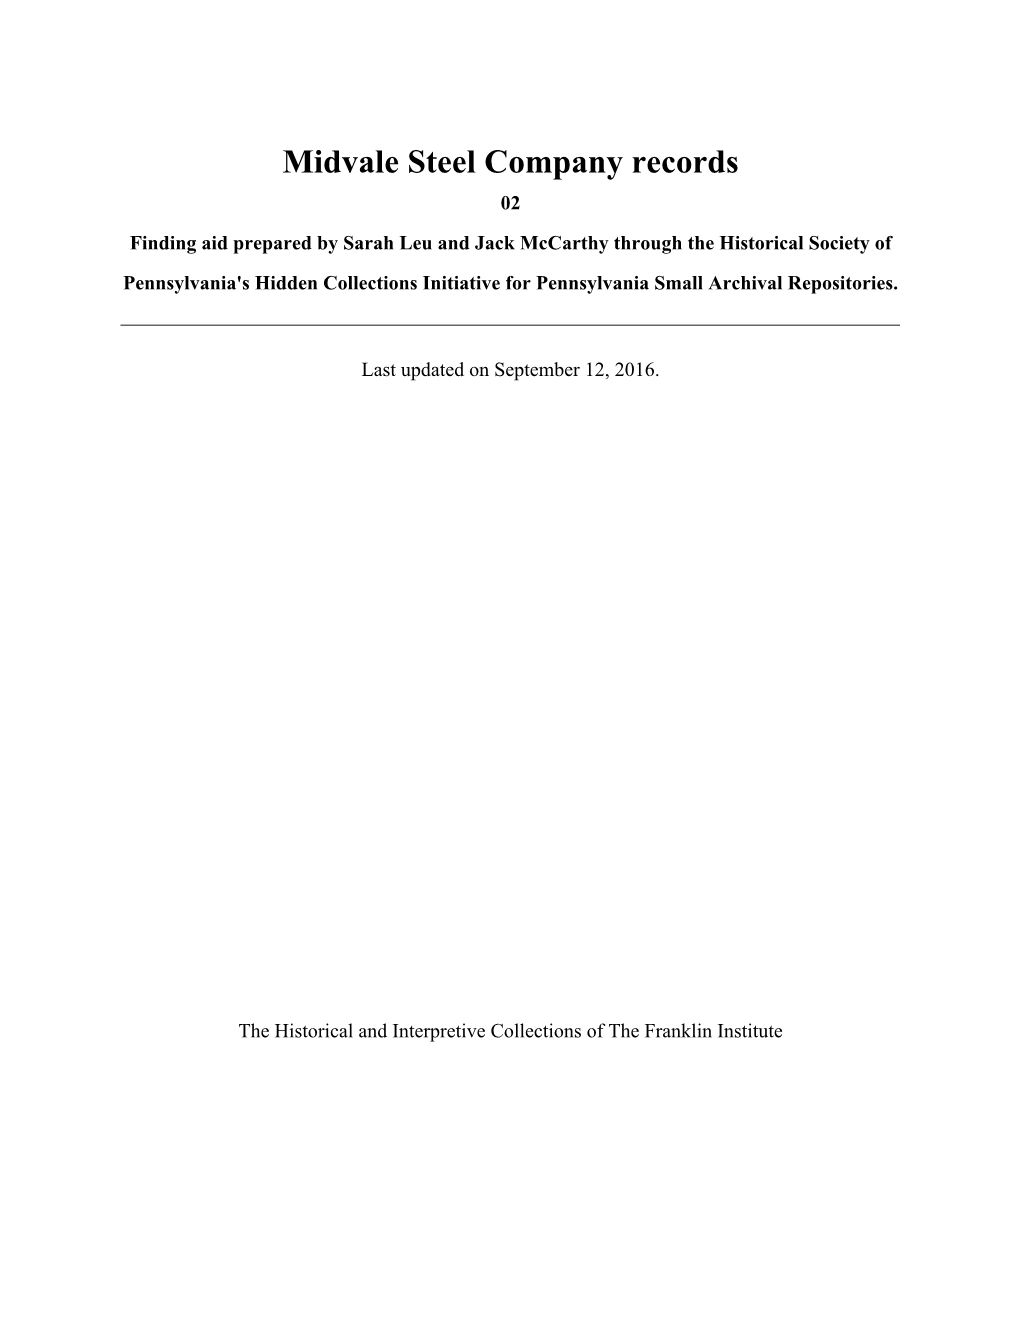 Midvale Steel Company Records